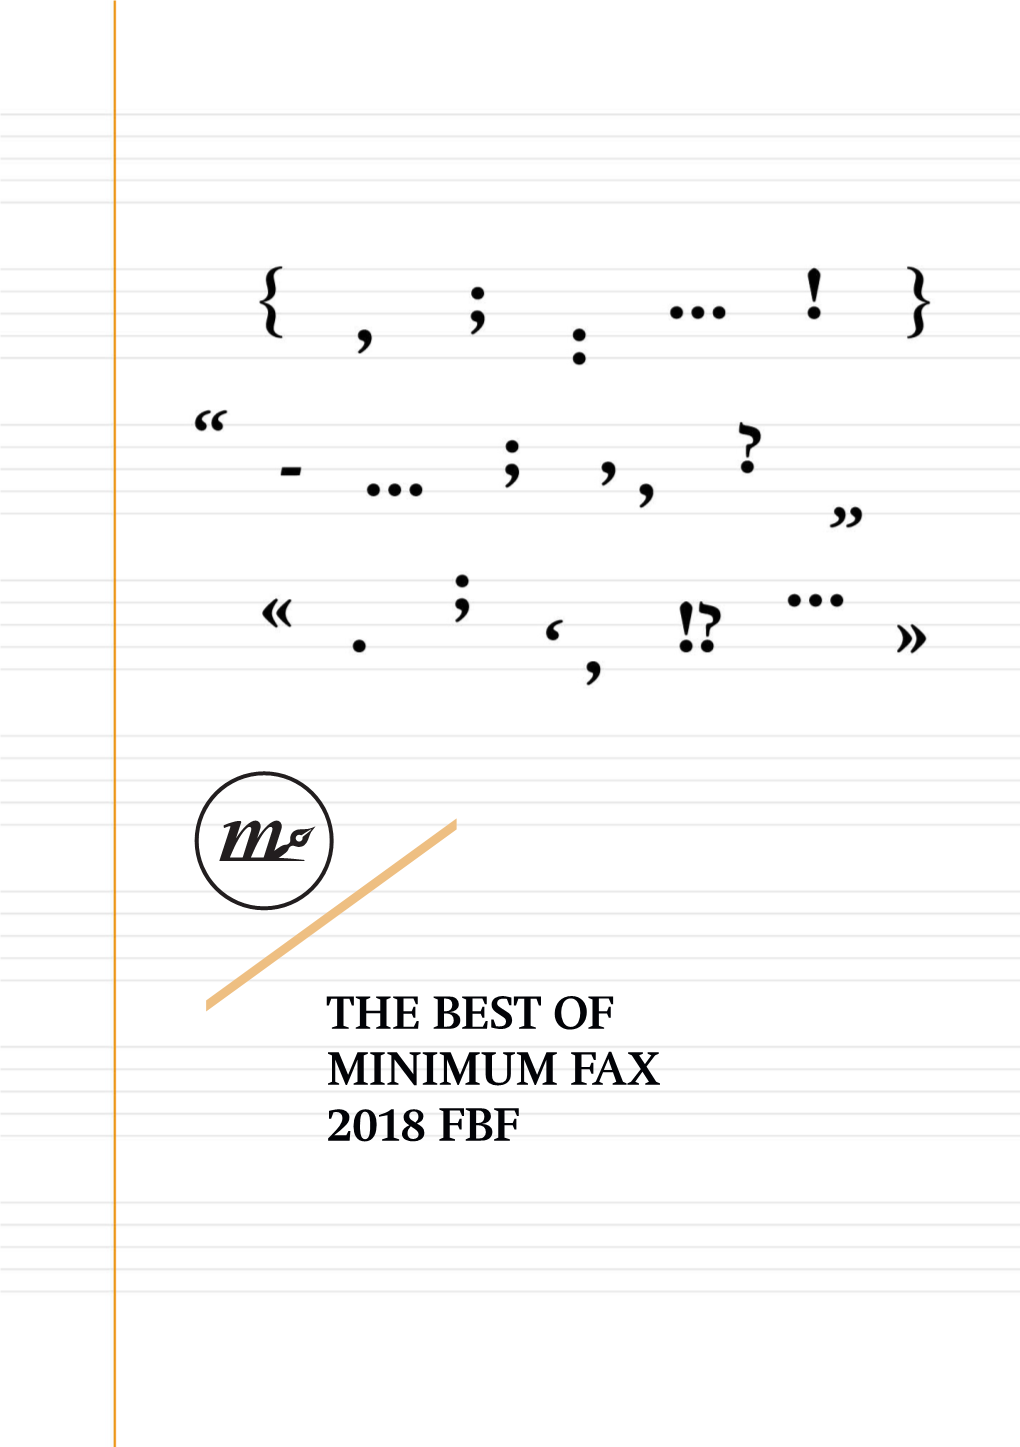 THE BEST of MINIMUM FAX 2018 FBF NEW TITLE FICTION November 2018 150 Pages